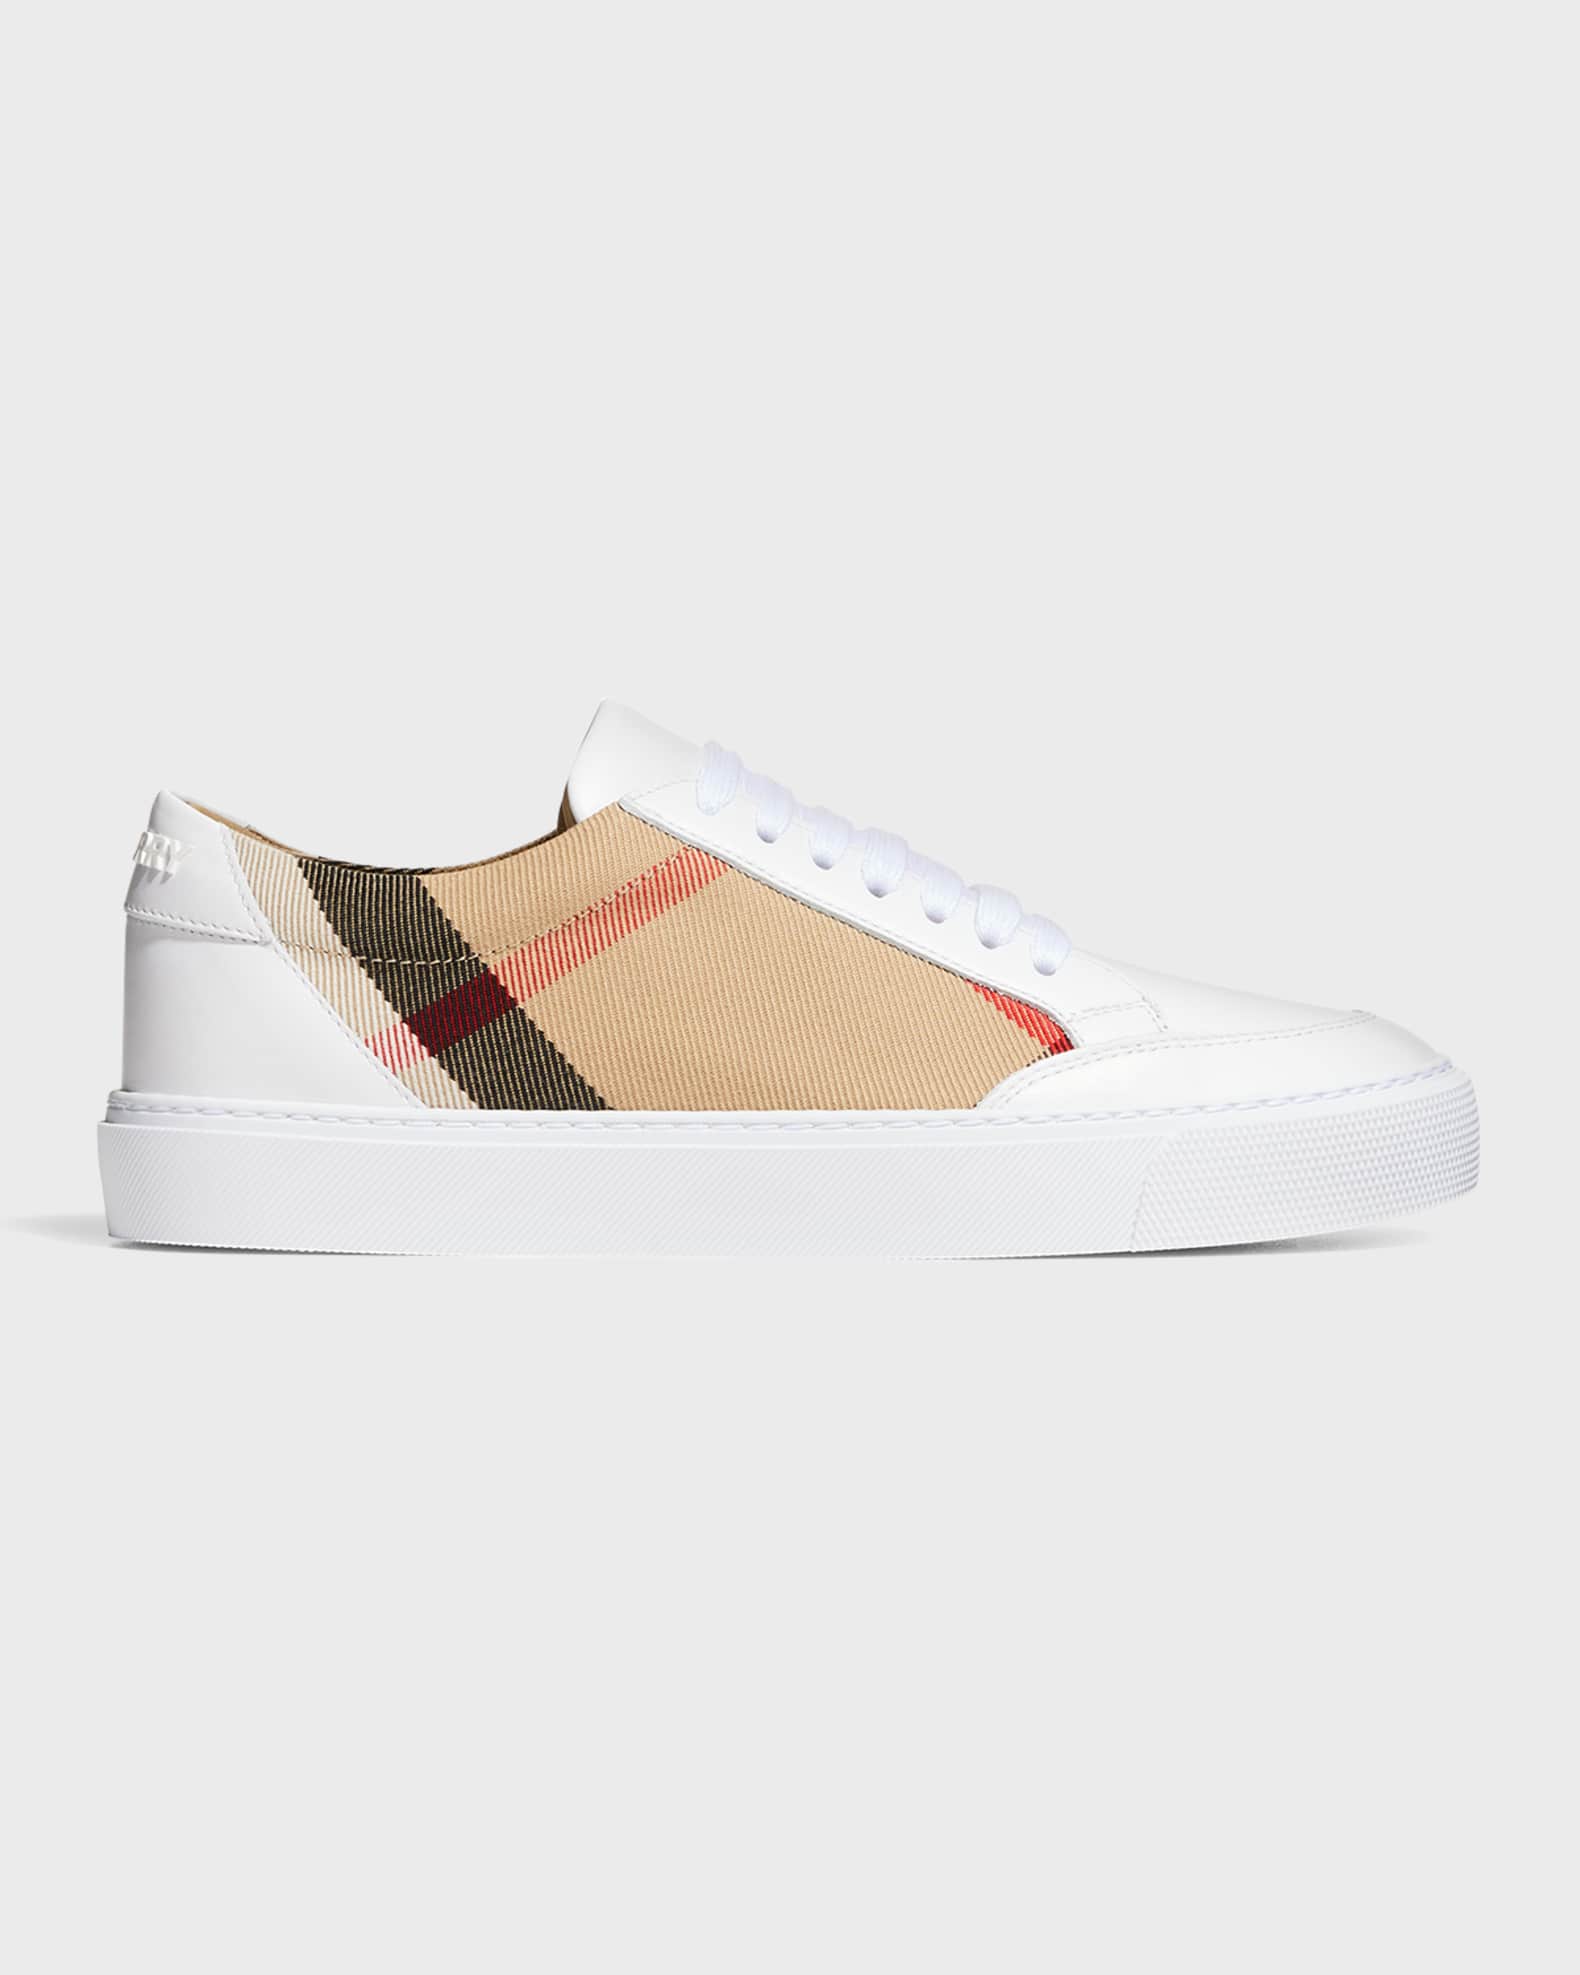 Fresh and Clean: Burberry Salmond Check Leather Sneakers in White